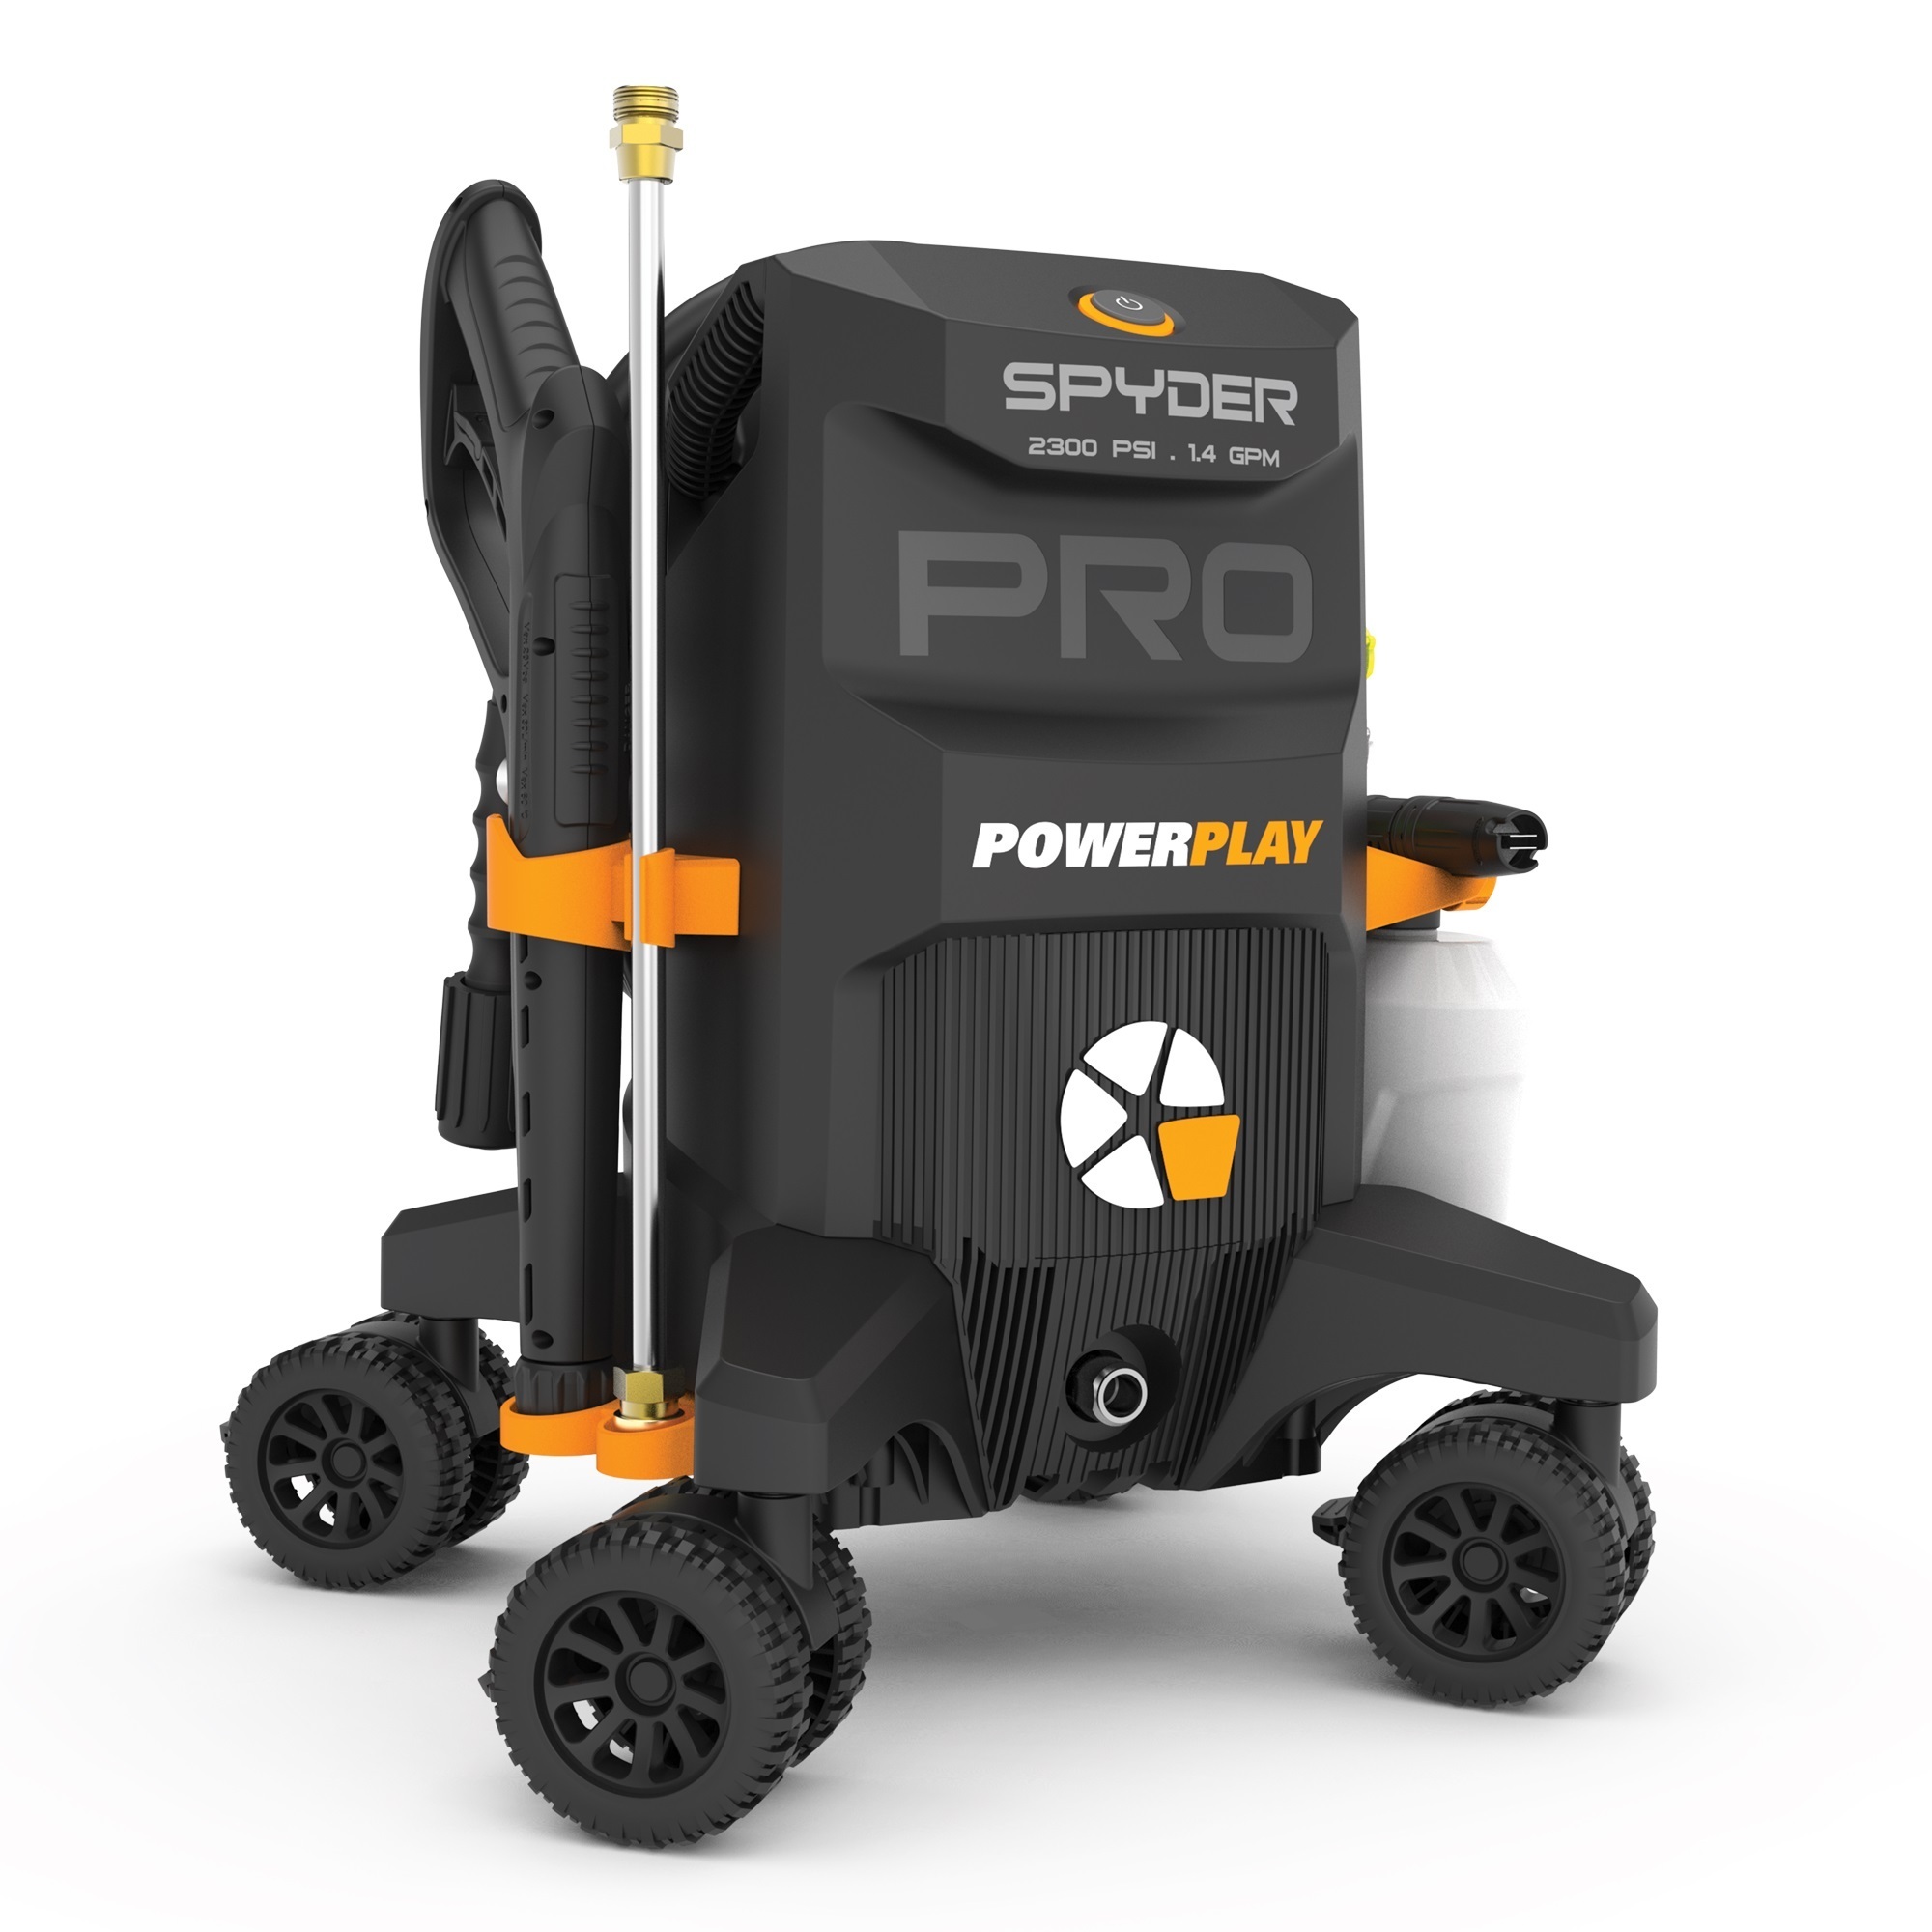 Powerplay, SPYDER PRO 2300PSI Electric Pressure Washer, Pressure 2300 PSI, Flow 1.5 GPM, Volts 120 Model SPY2300XP